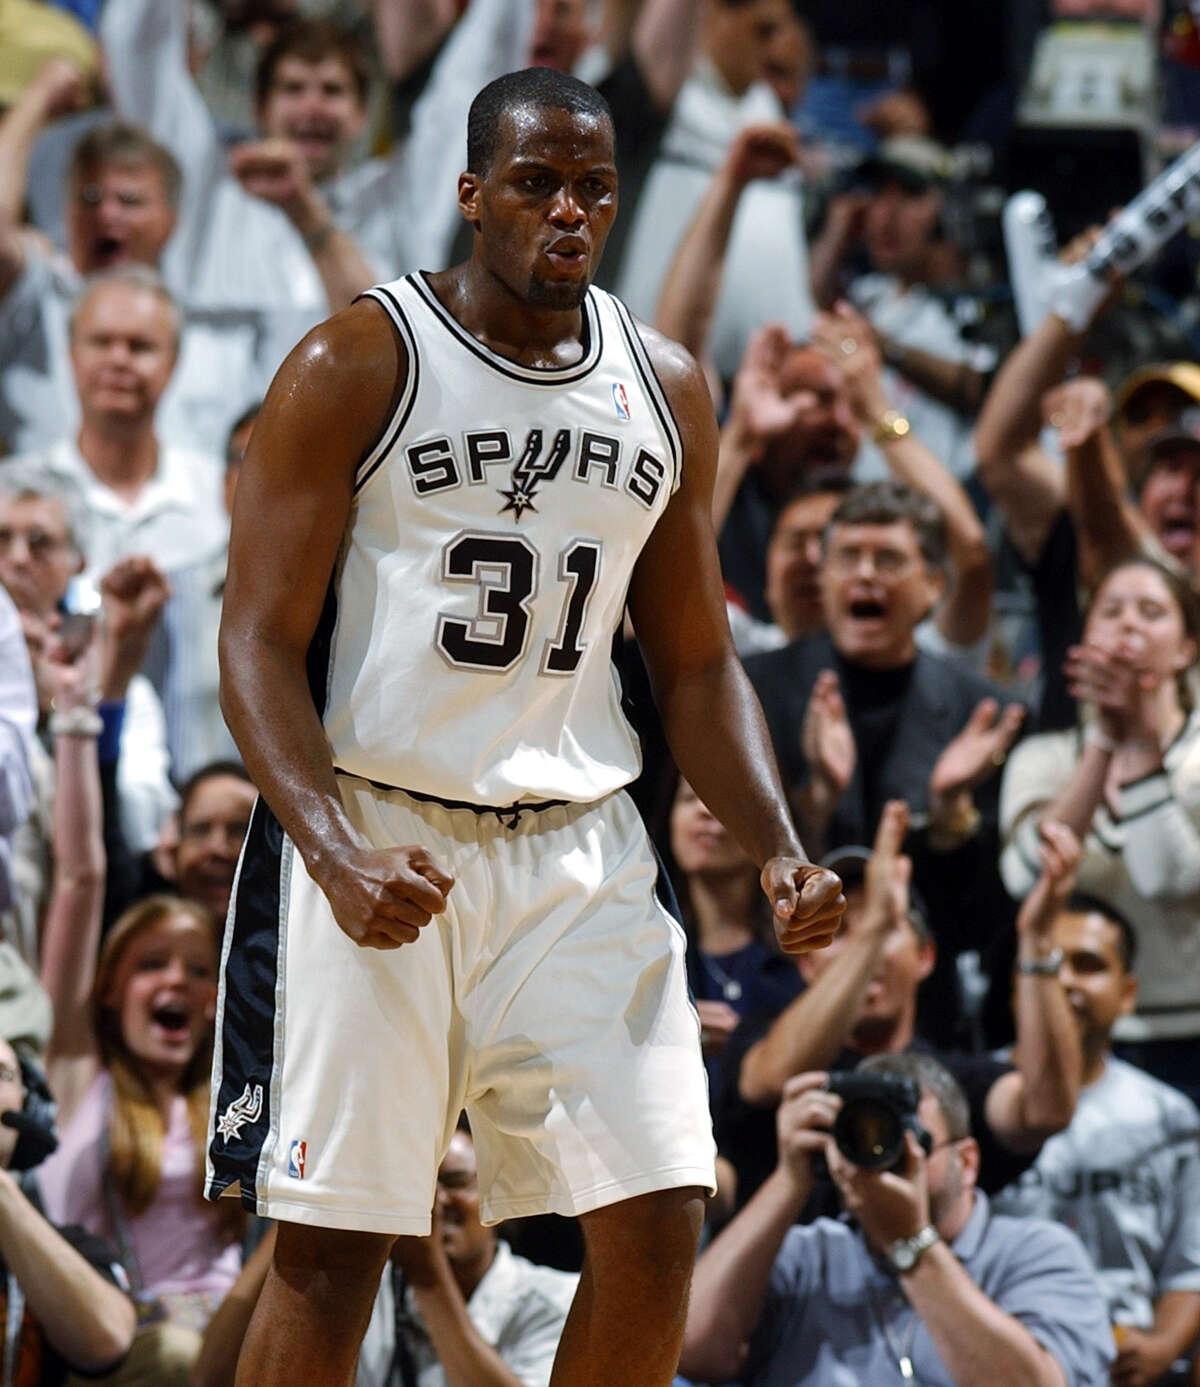 Spurs’ Malik Rose reacts after scoring during the third quarter in game two of the Western Conference Finals at the SBC Center on May 21, 2003. The Spurs beat the Dallas Mavericks 119-106.